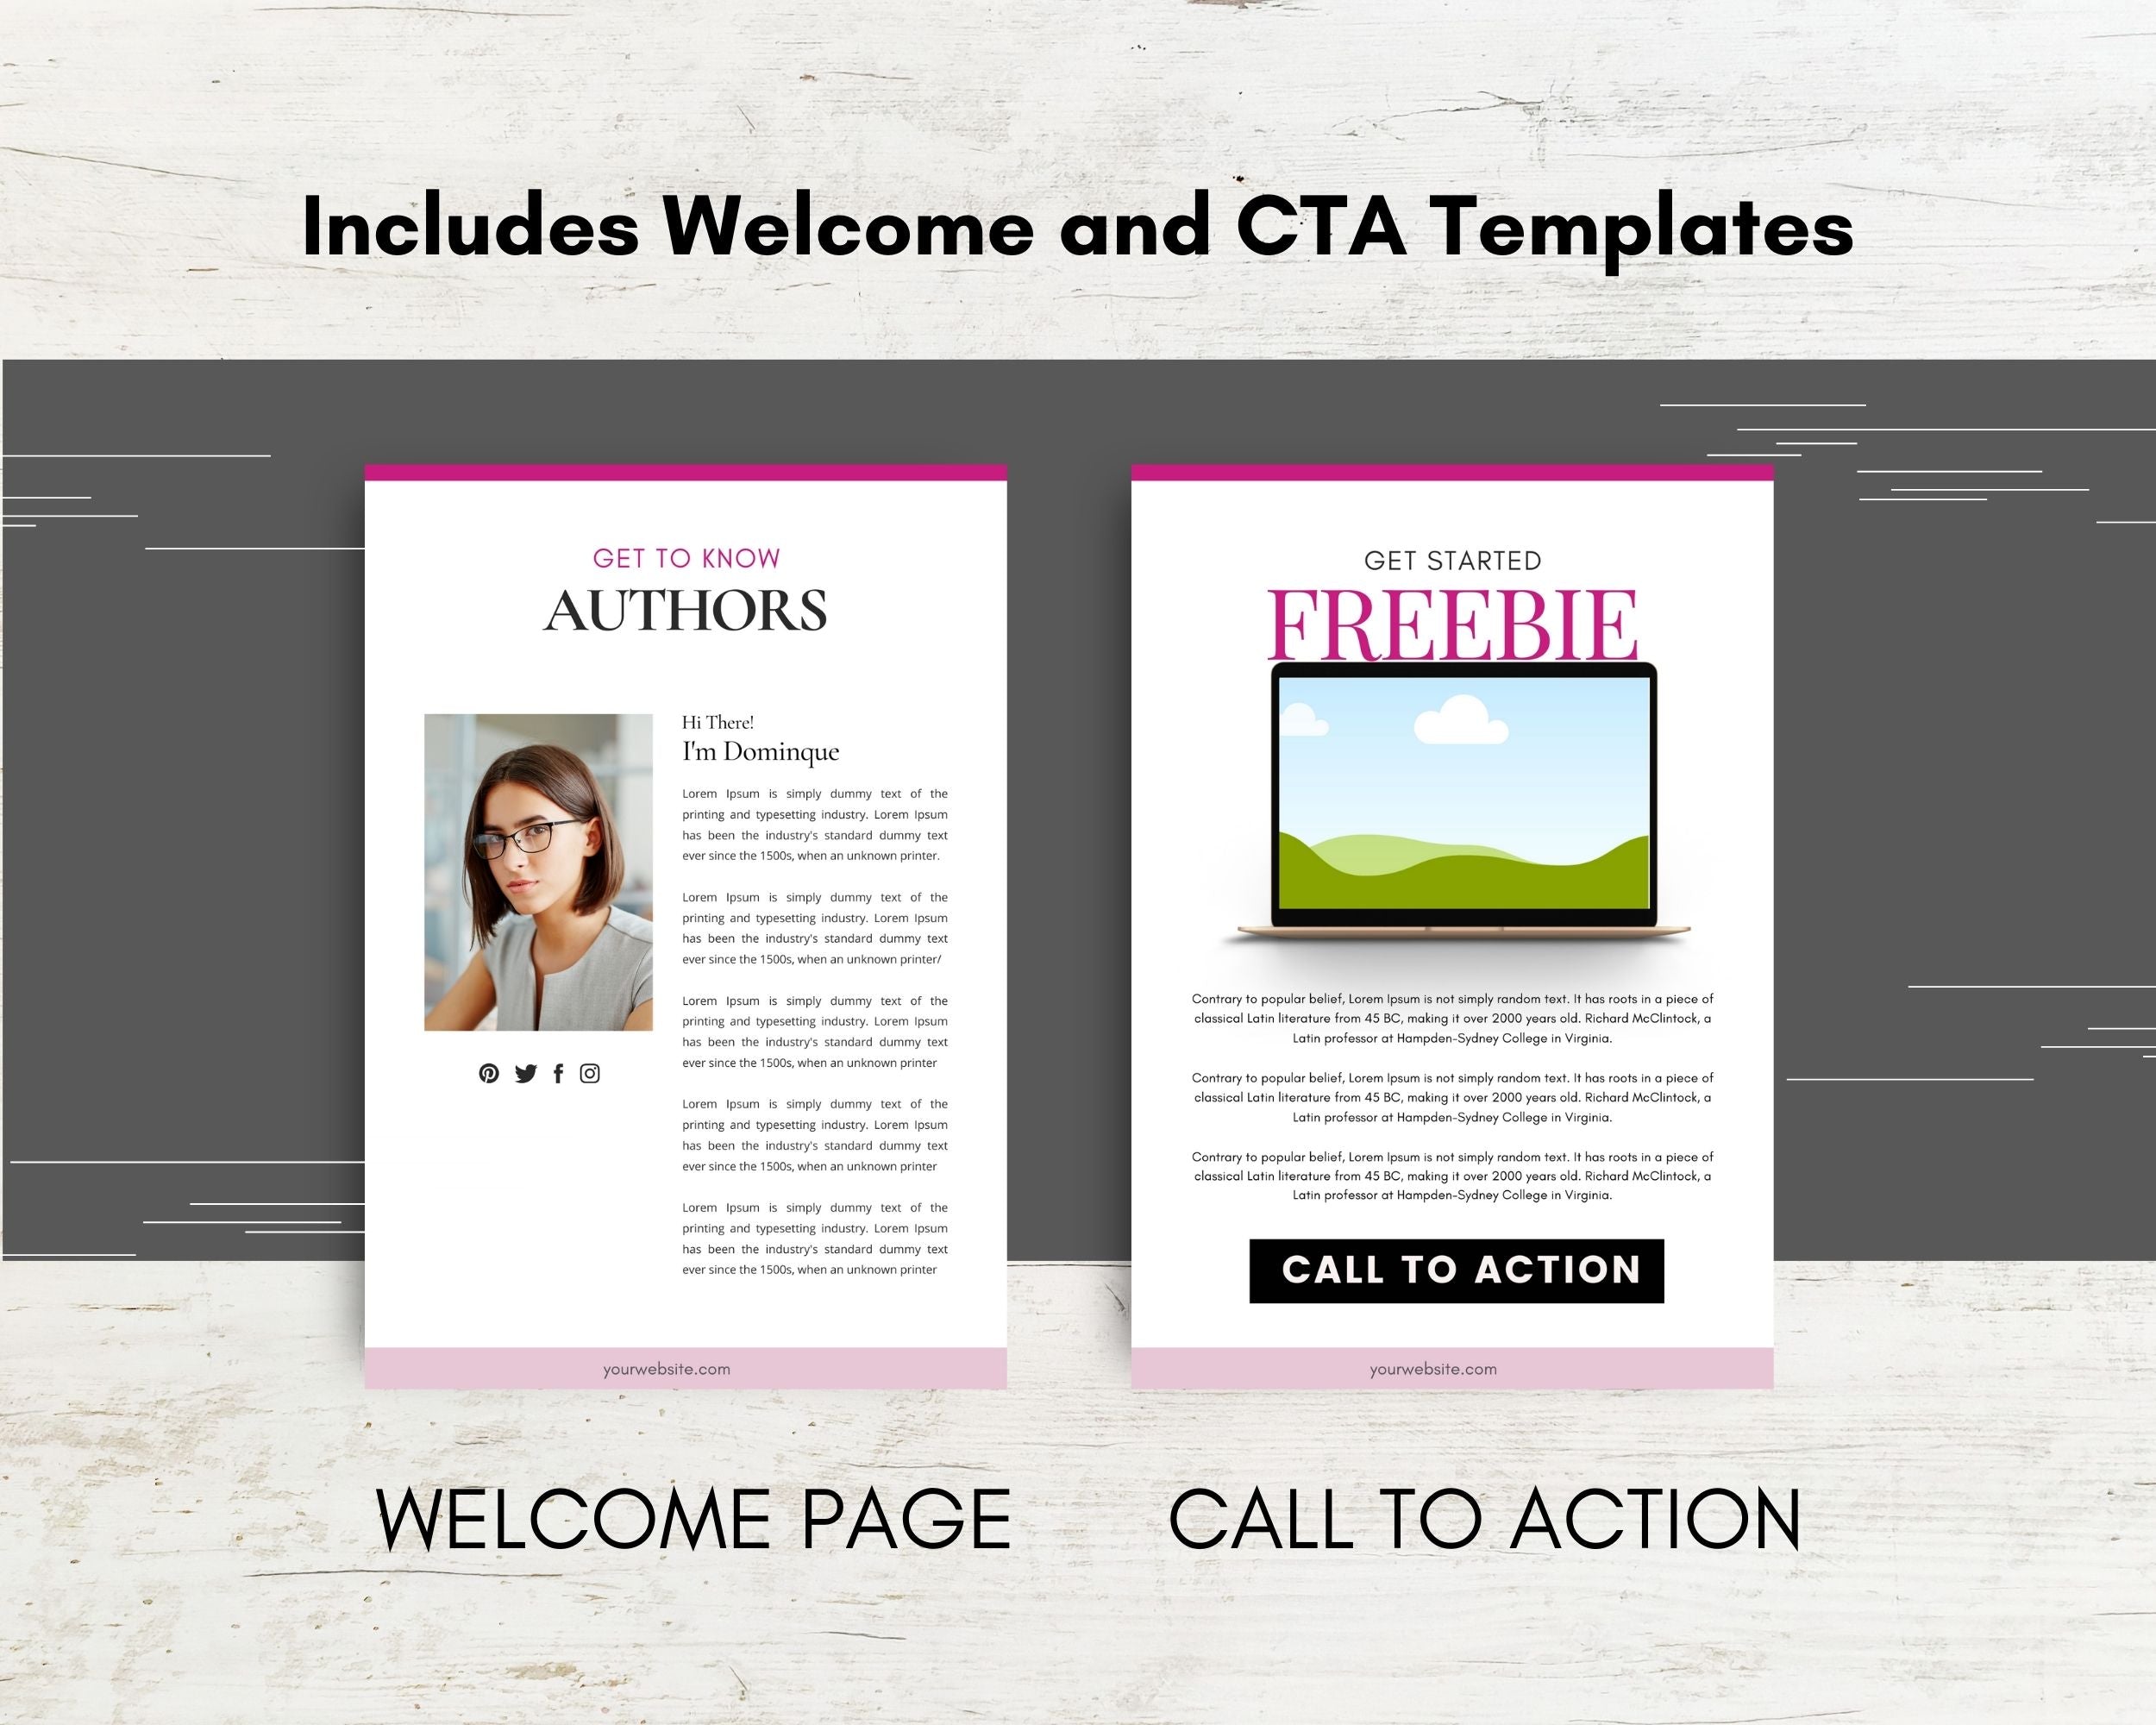 Editable Secrets To Successful Career Ebook | Done-for-You Ebook in Canva | Rebrandable and Resizable Canva Template